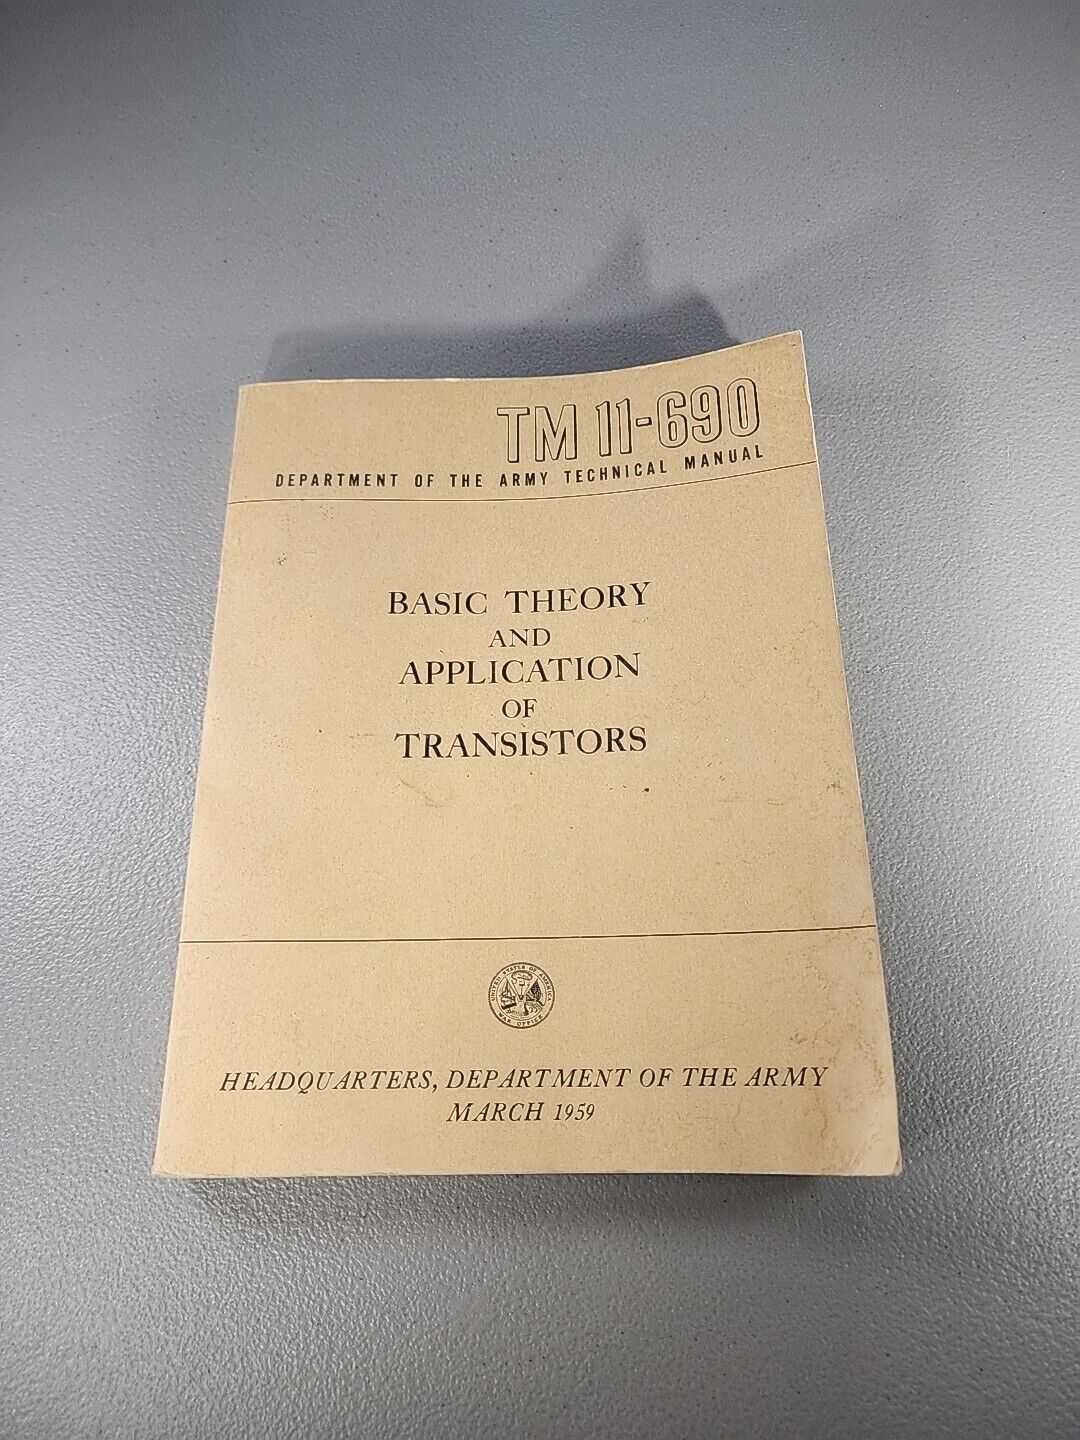 TM 11-690 Basic Theory And Application of Transistors Dept. of the Army 1959